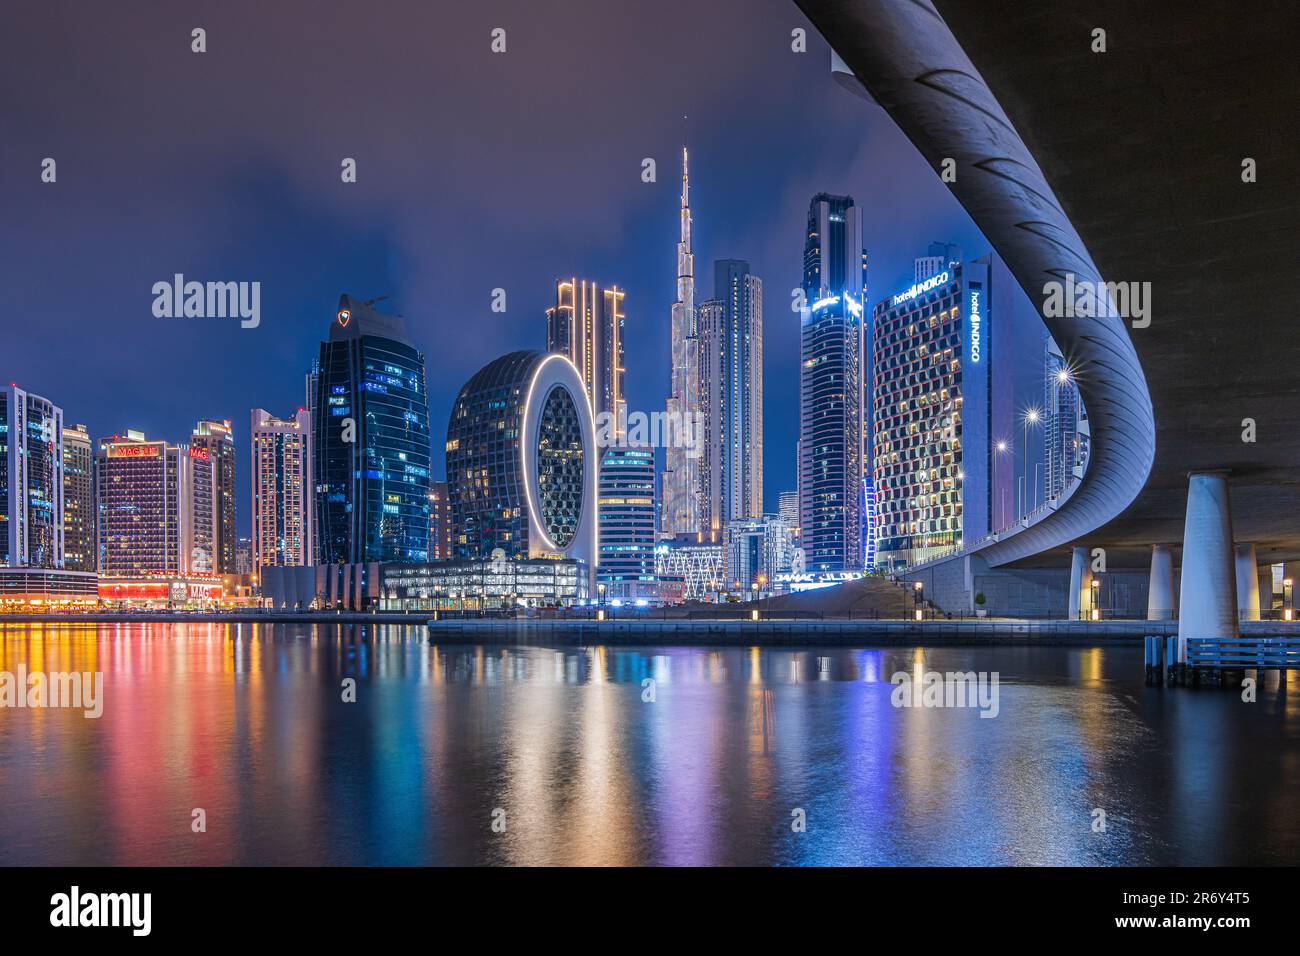 Dubai at night. City skyline in United Arab Emirates. Skyscrapers illuminated at the blue hour with a curved course of a bridge. Reflections on water Stock Photo